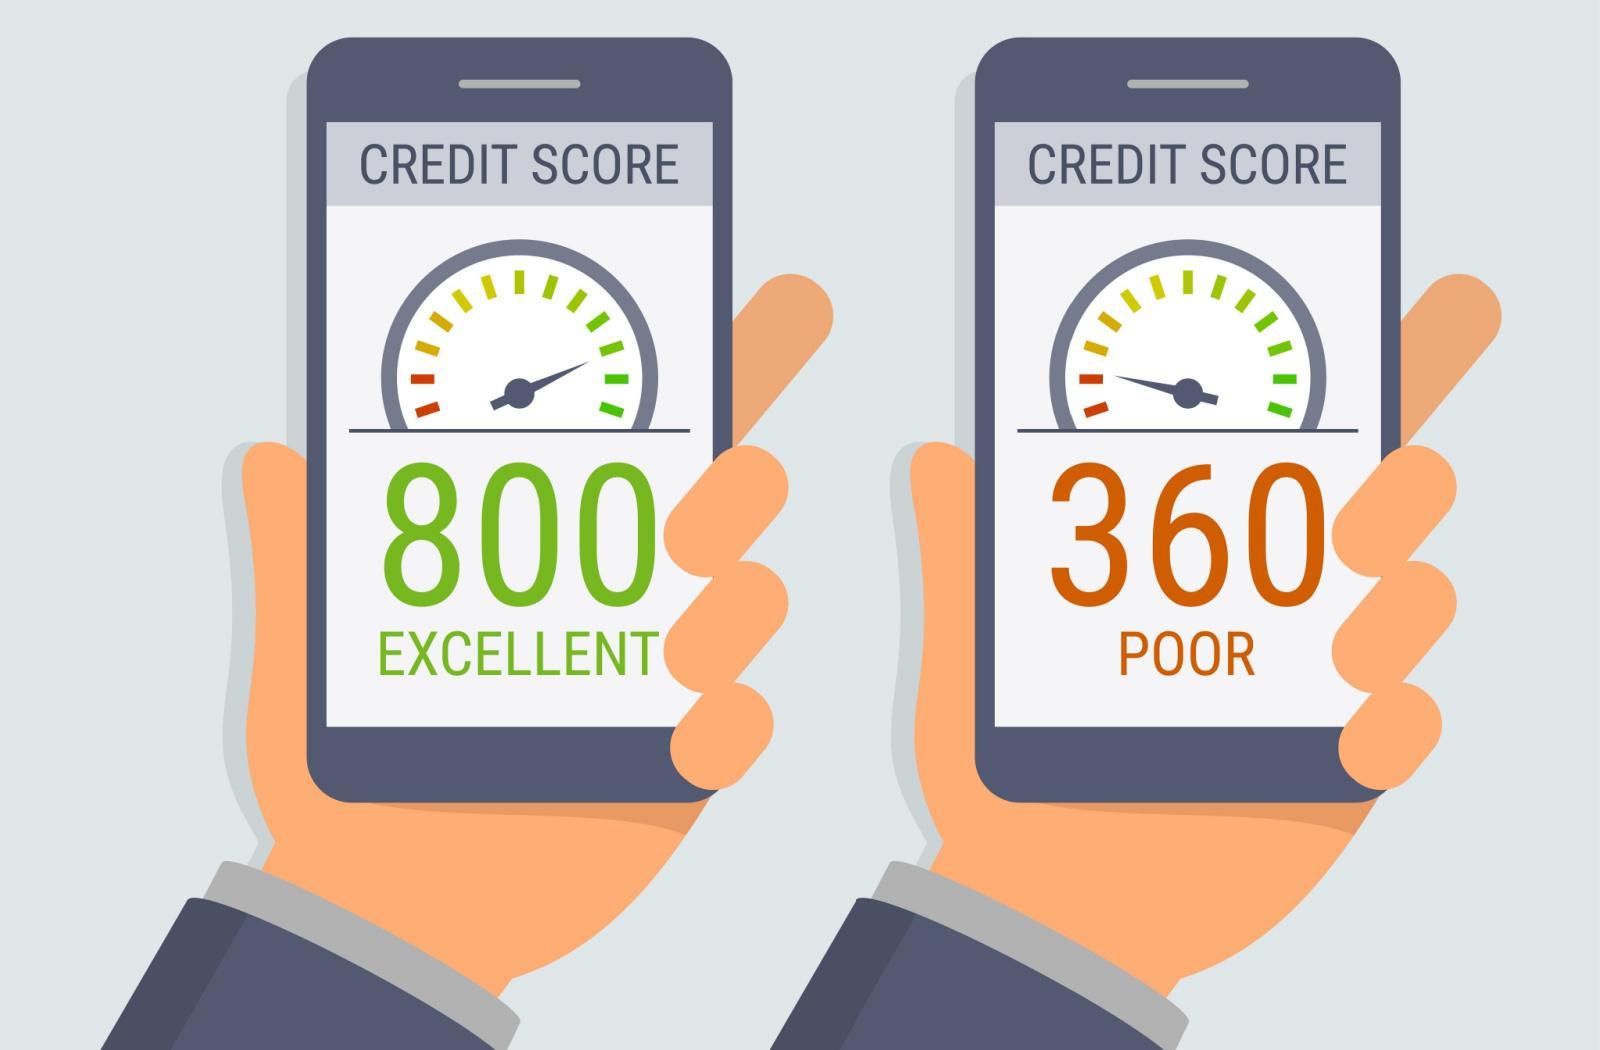 two people holding their phones, analyzing their credit scores. one phone shows a credit score of 800, the other shows a credit score of 360
